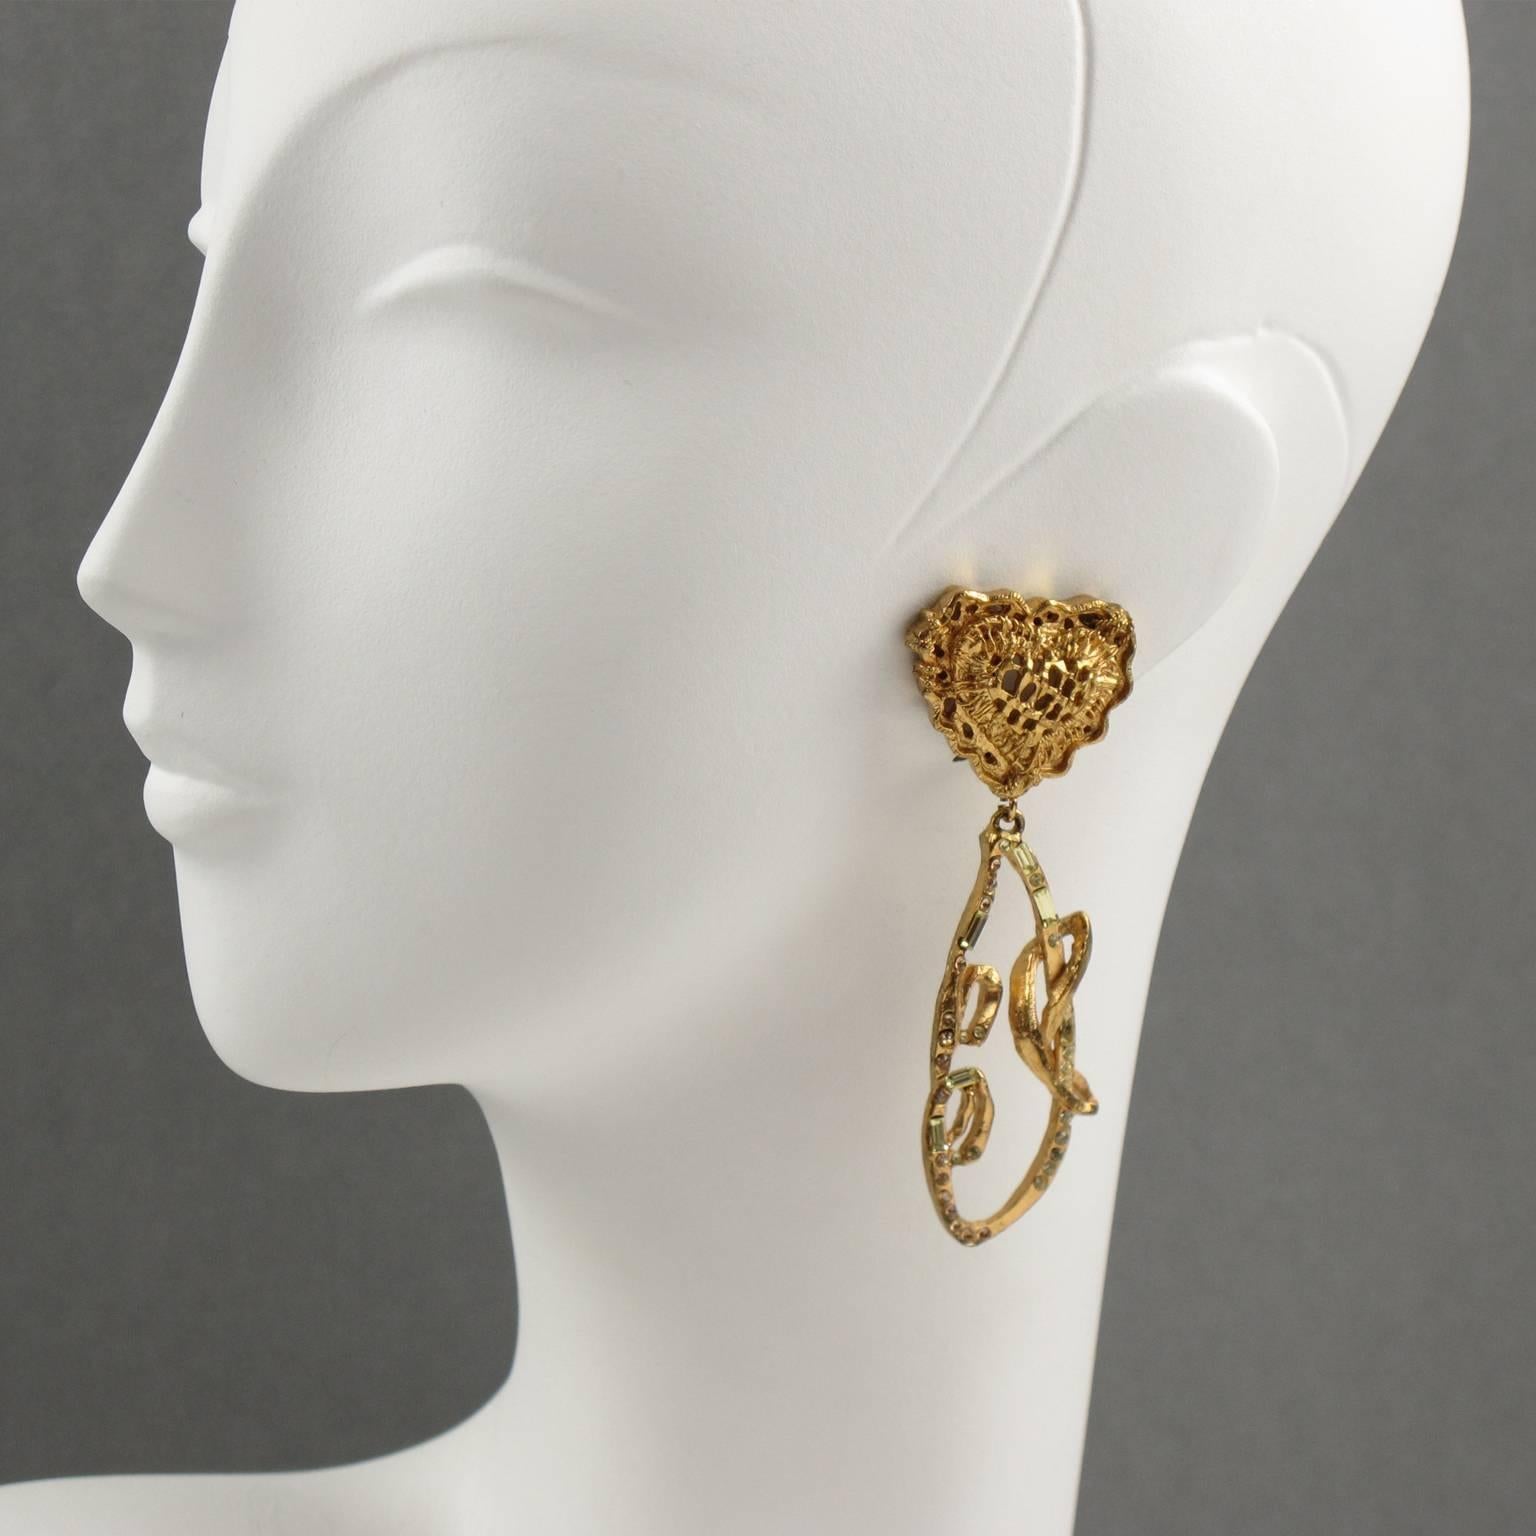 CHRISTIAN LACROIX Paris signed clip on earrings. Elegant modernist gilt metal dangling shape, metal all textured, featuring a pierced heart and lace dangling element, all paved with shaped clear and champagne rhinestones and clip back. Signed on